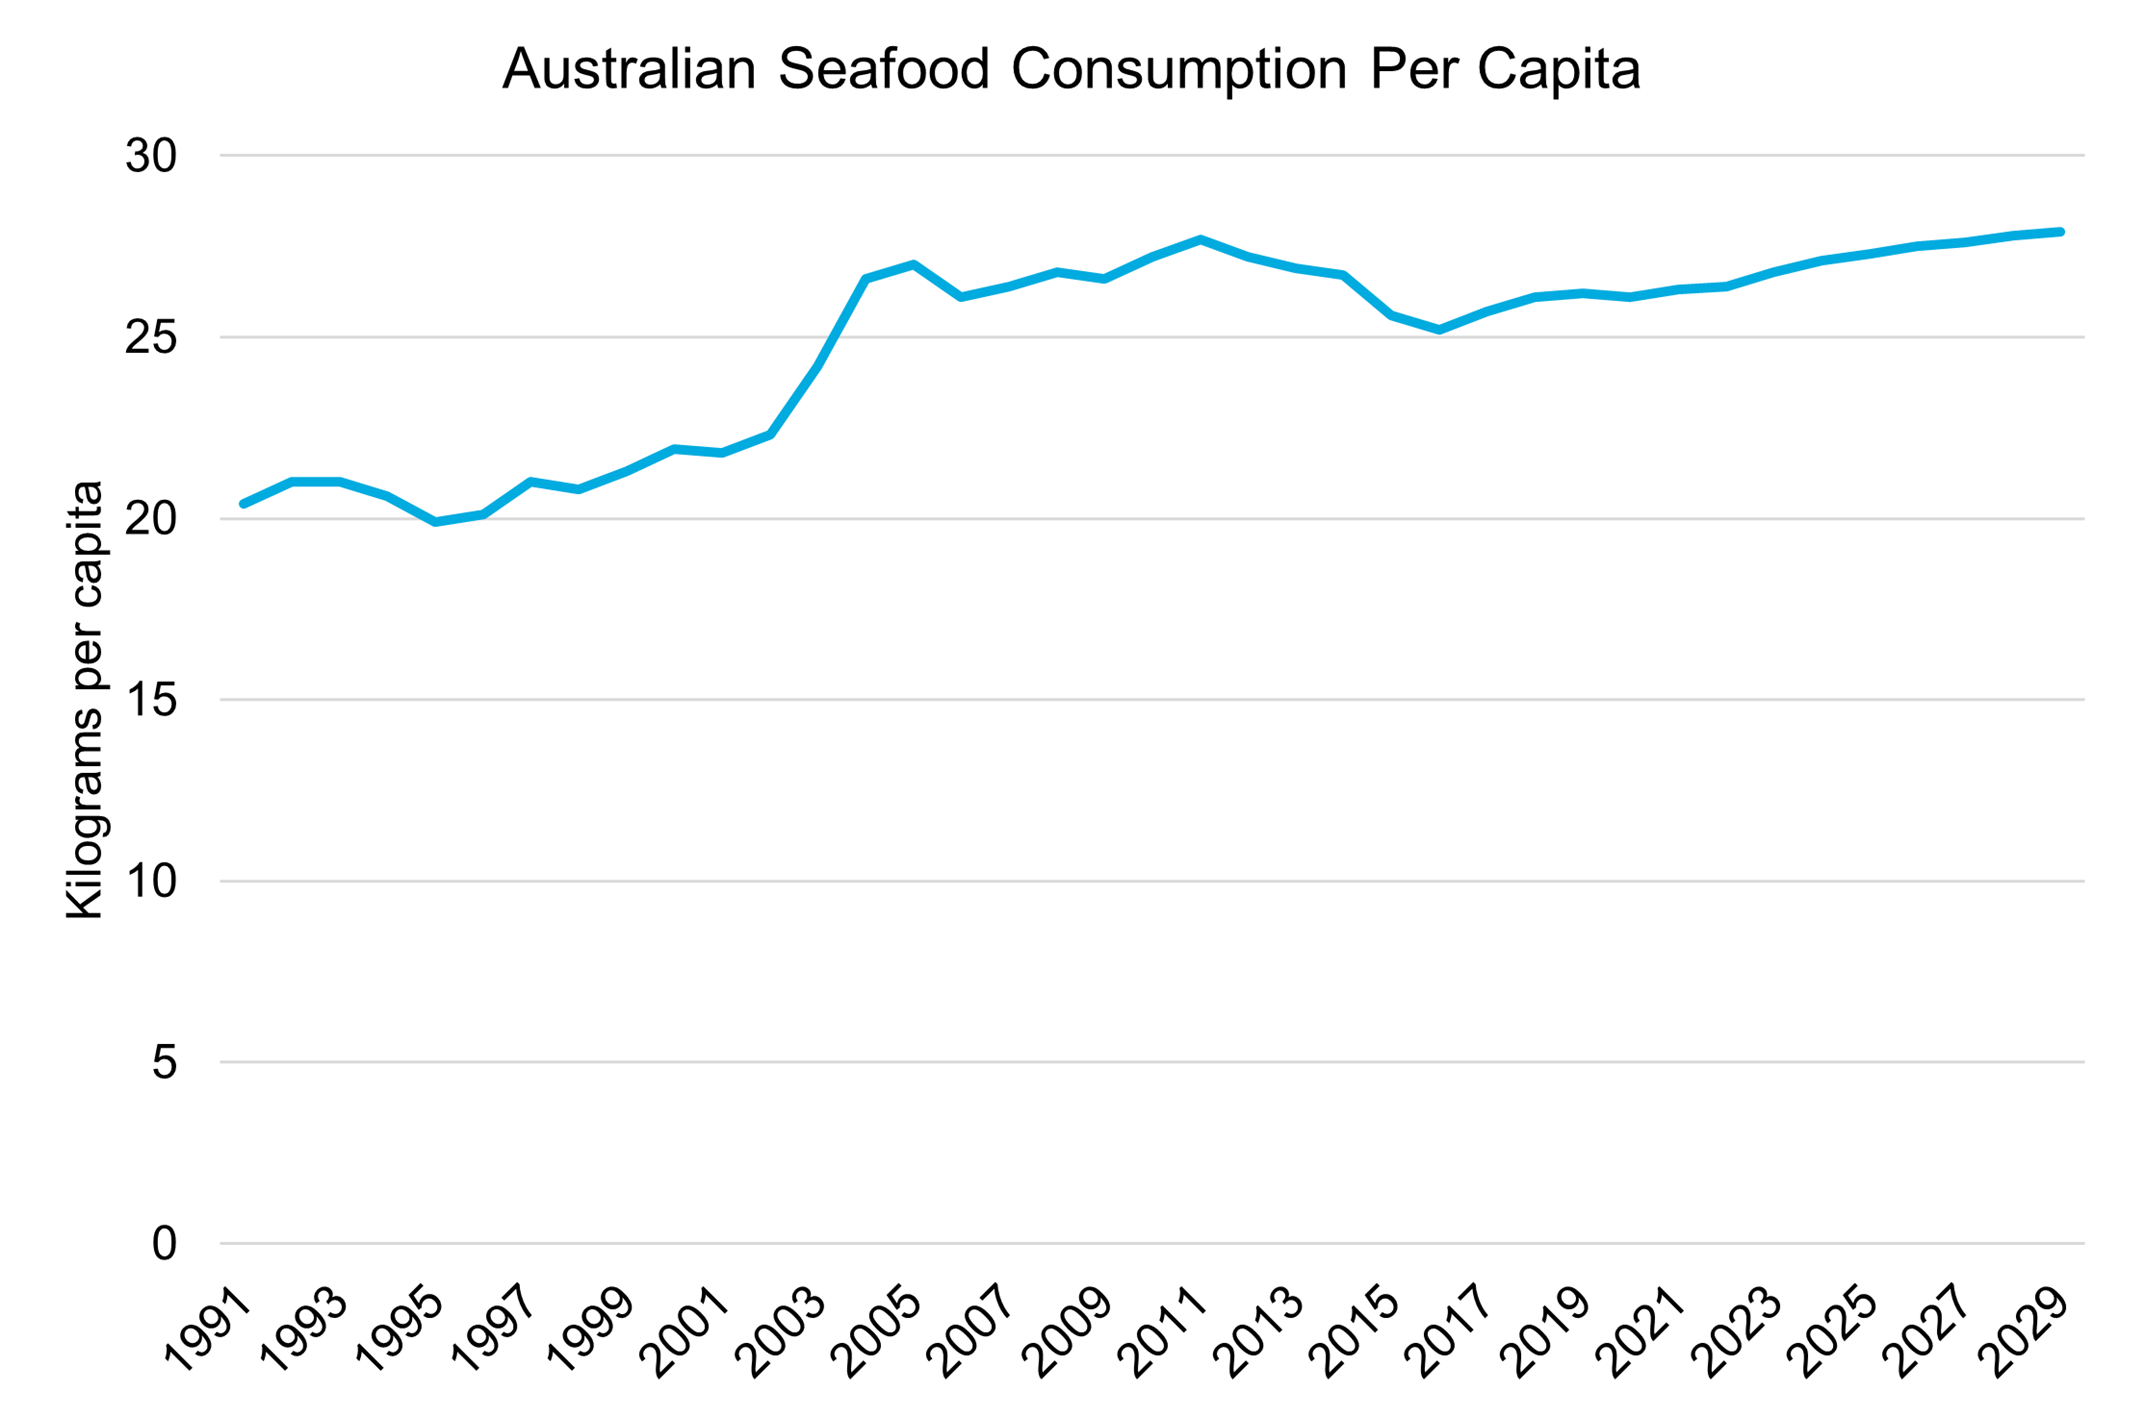 Graph showing Australian seafood consumption per capita from 1991 to 2029. Australian seafood consumption is expected to rise to 27.9 kilograms per capita by 2029.